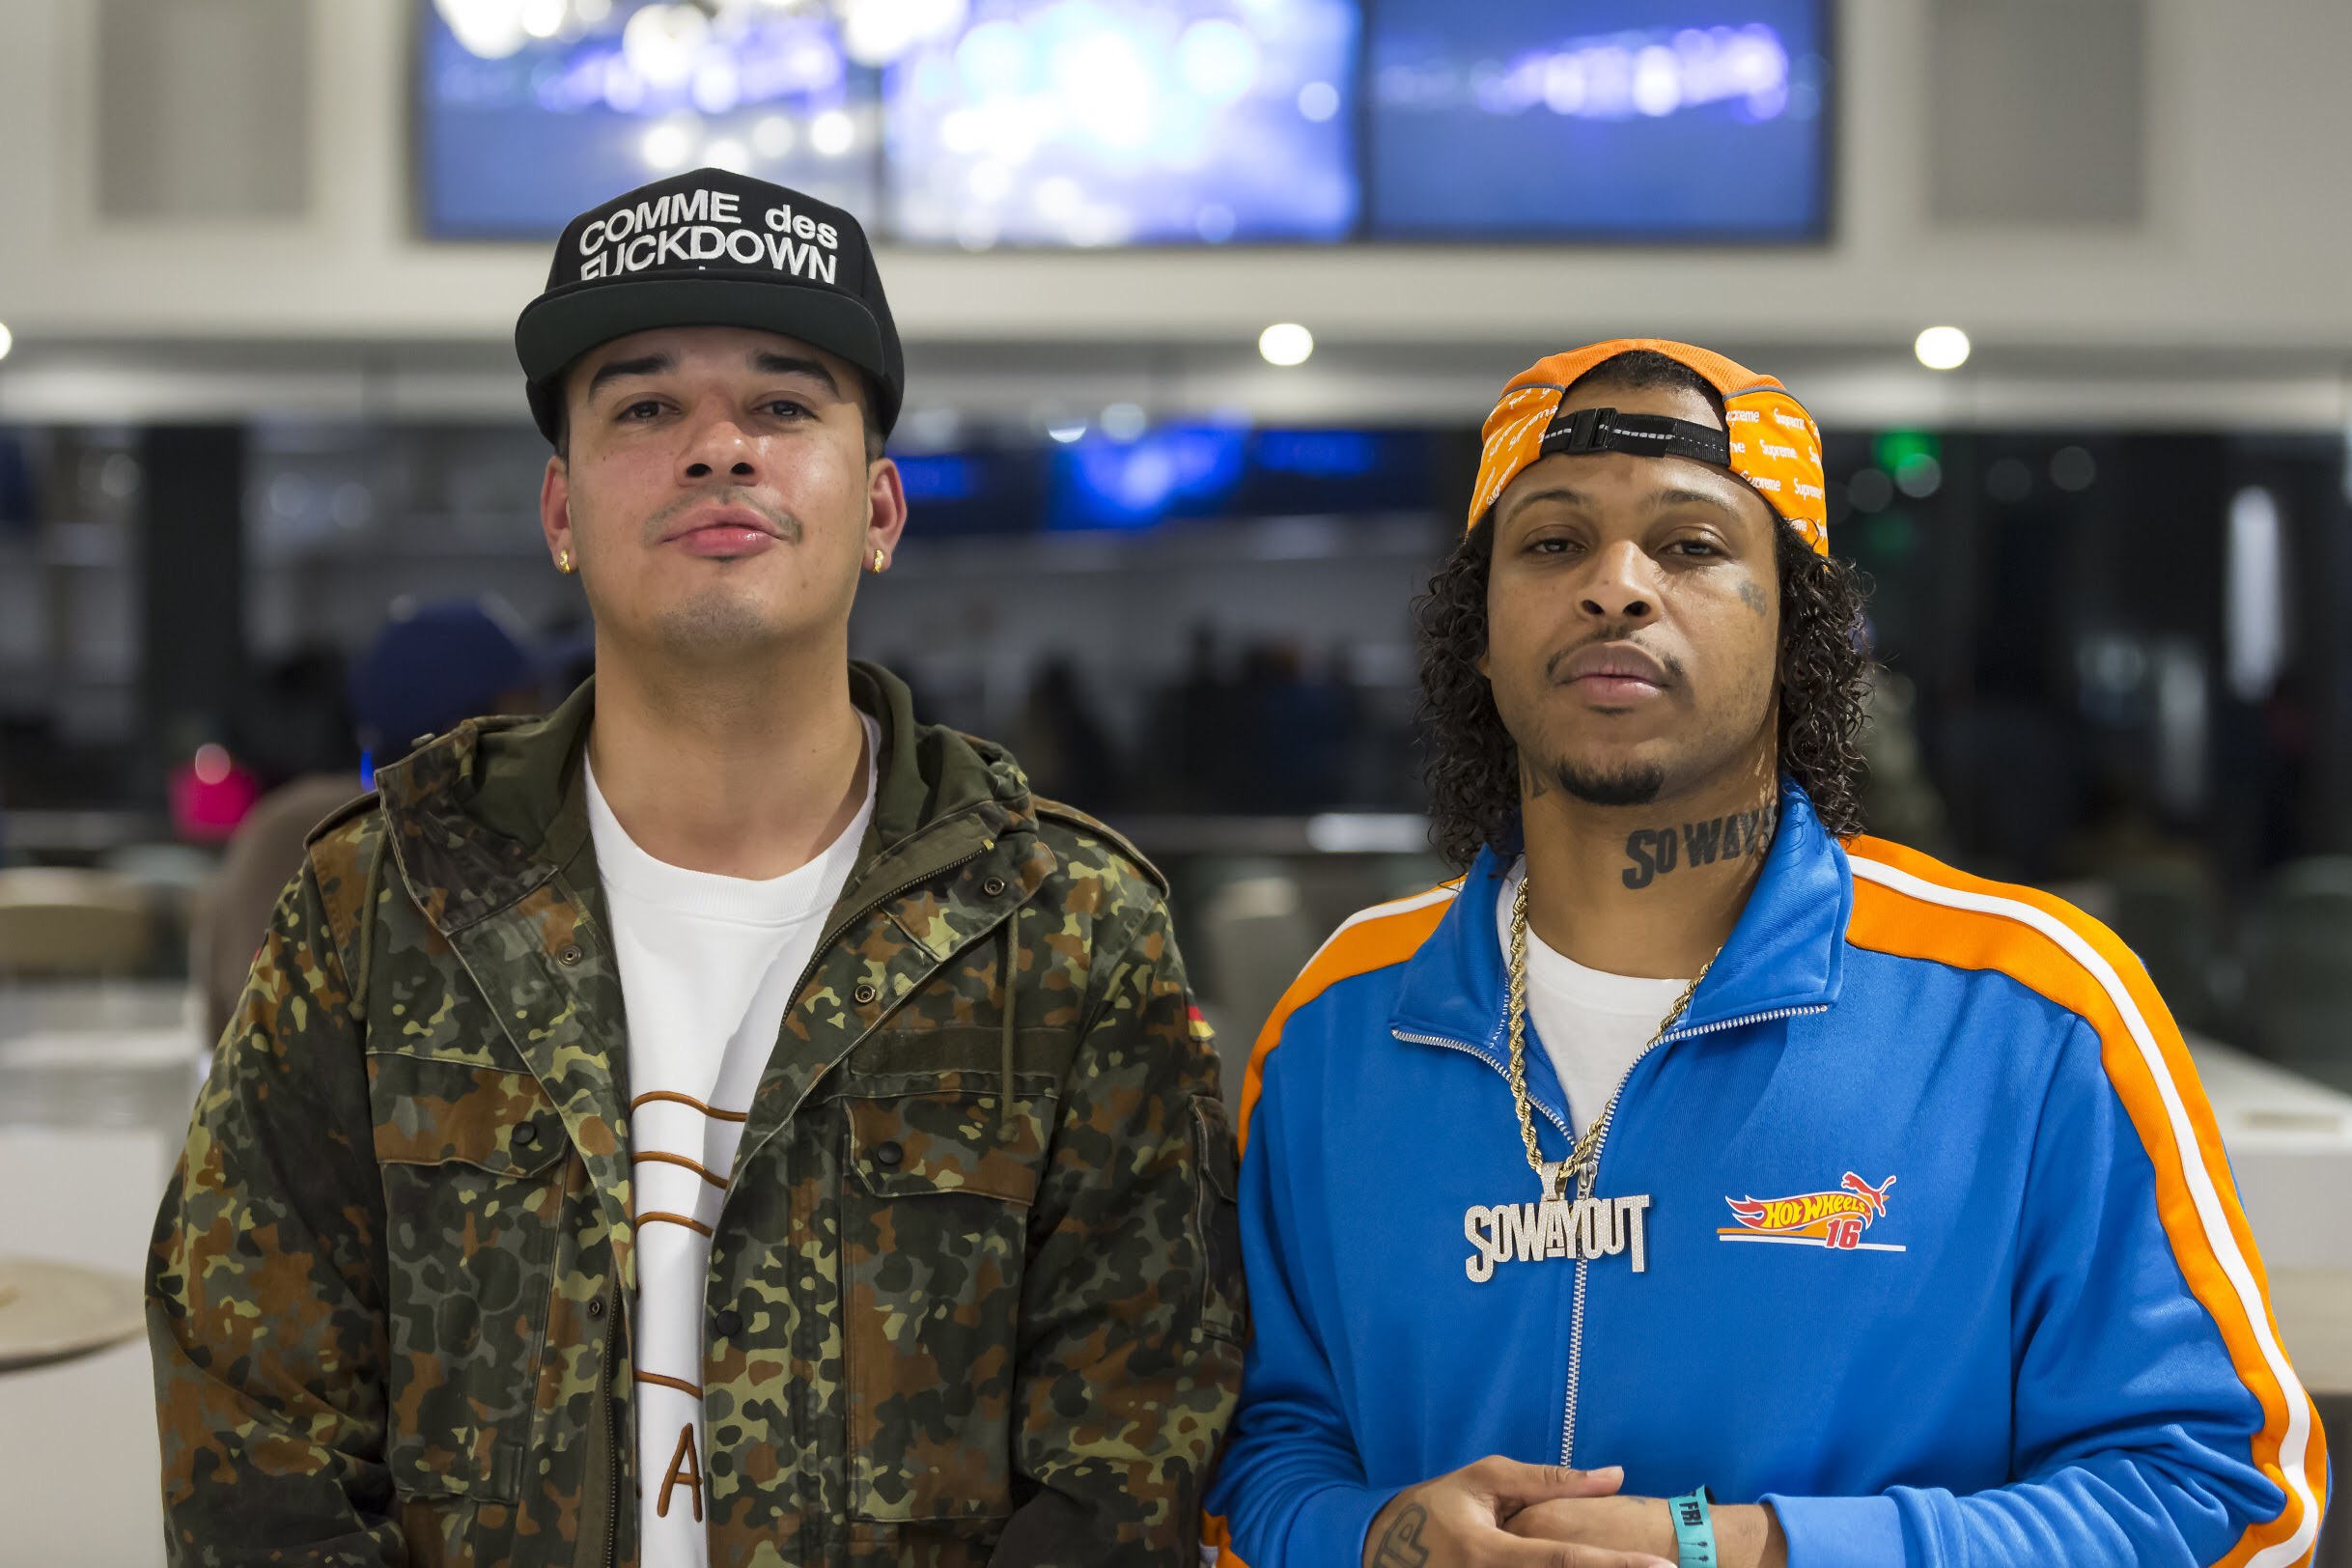 G Perico Talks To B-Nyce About Touring With Freddie Gibbs, Reflects On His Journey & More [WATCH]